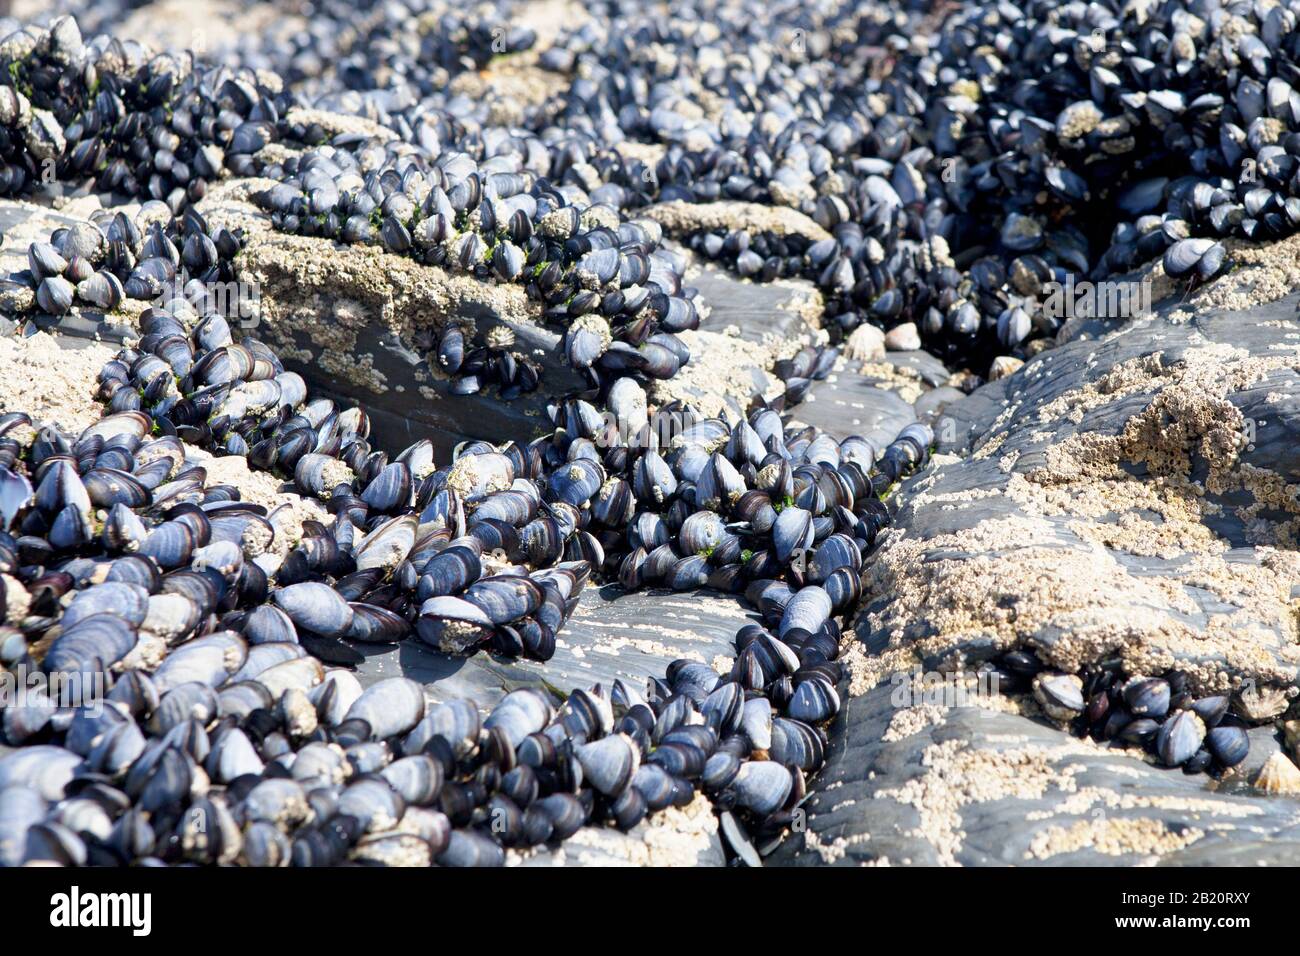 A large rock exposed at low tide, covered in mussels. Harlyn Bay, North Cornwall, UK. Stock Photo